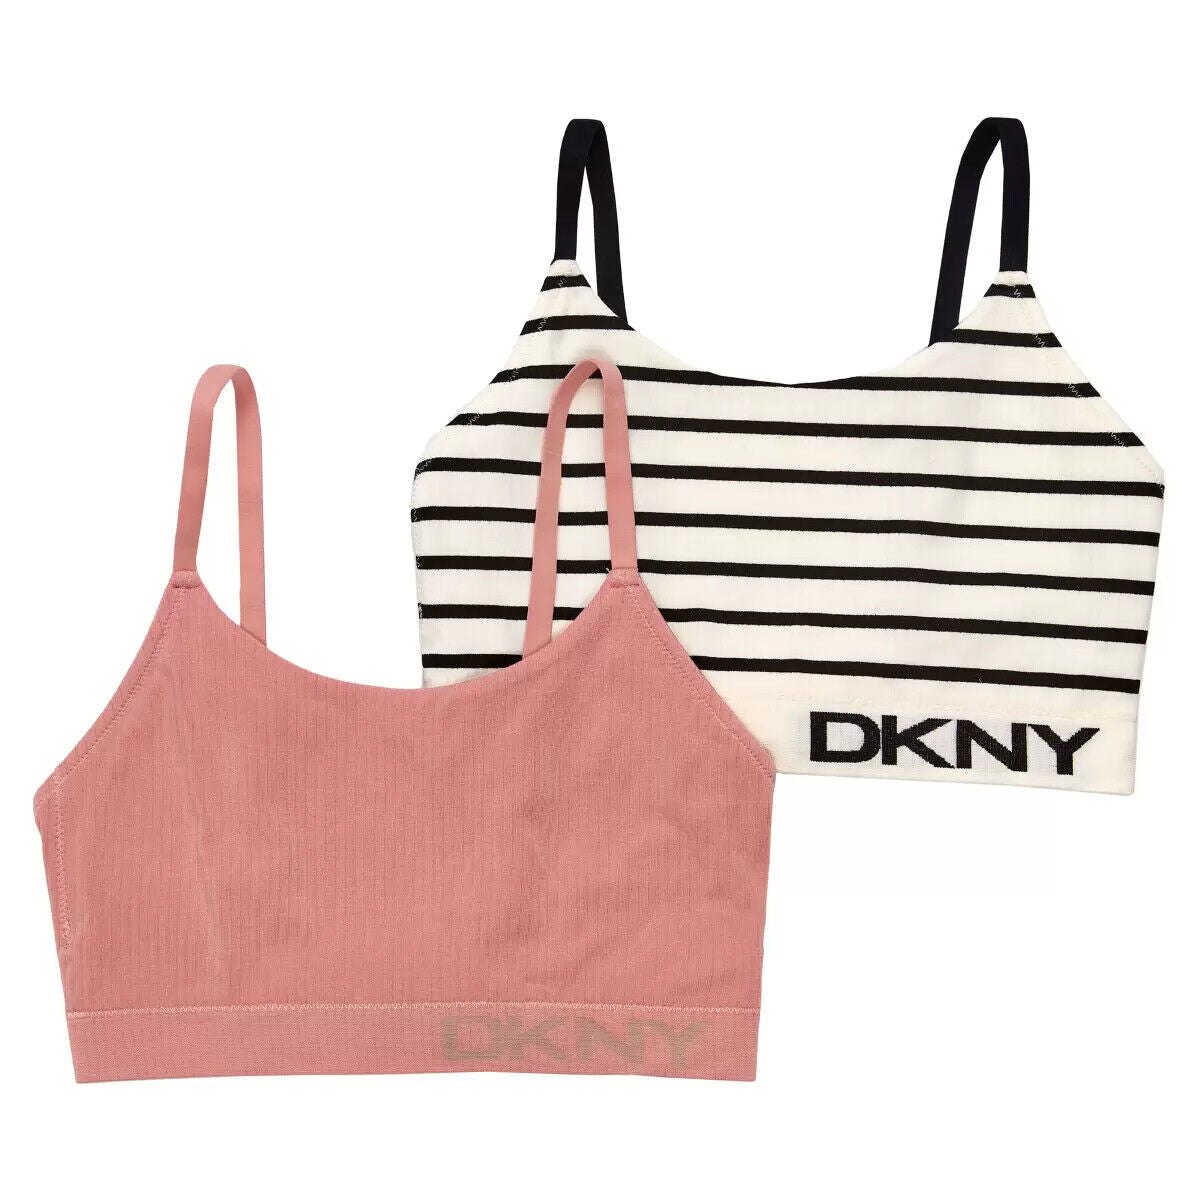 DKNY Women's Seamless Rib Knit 2 Pack Bralette in Pink/Nude, Small